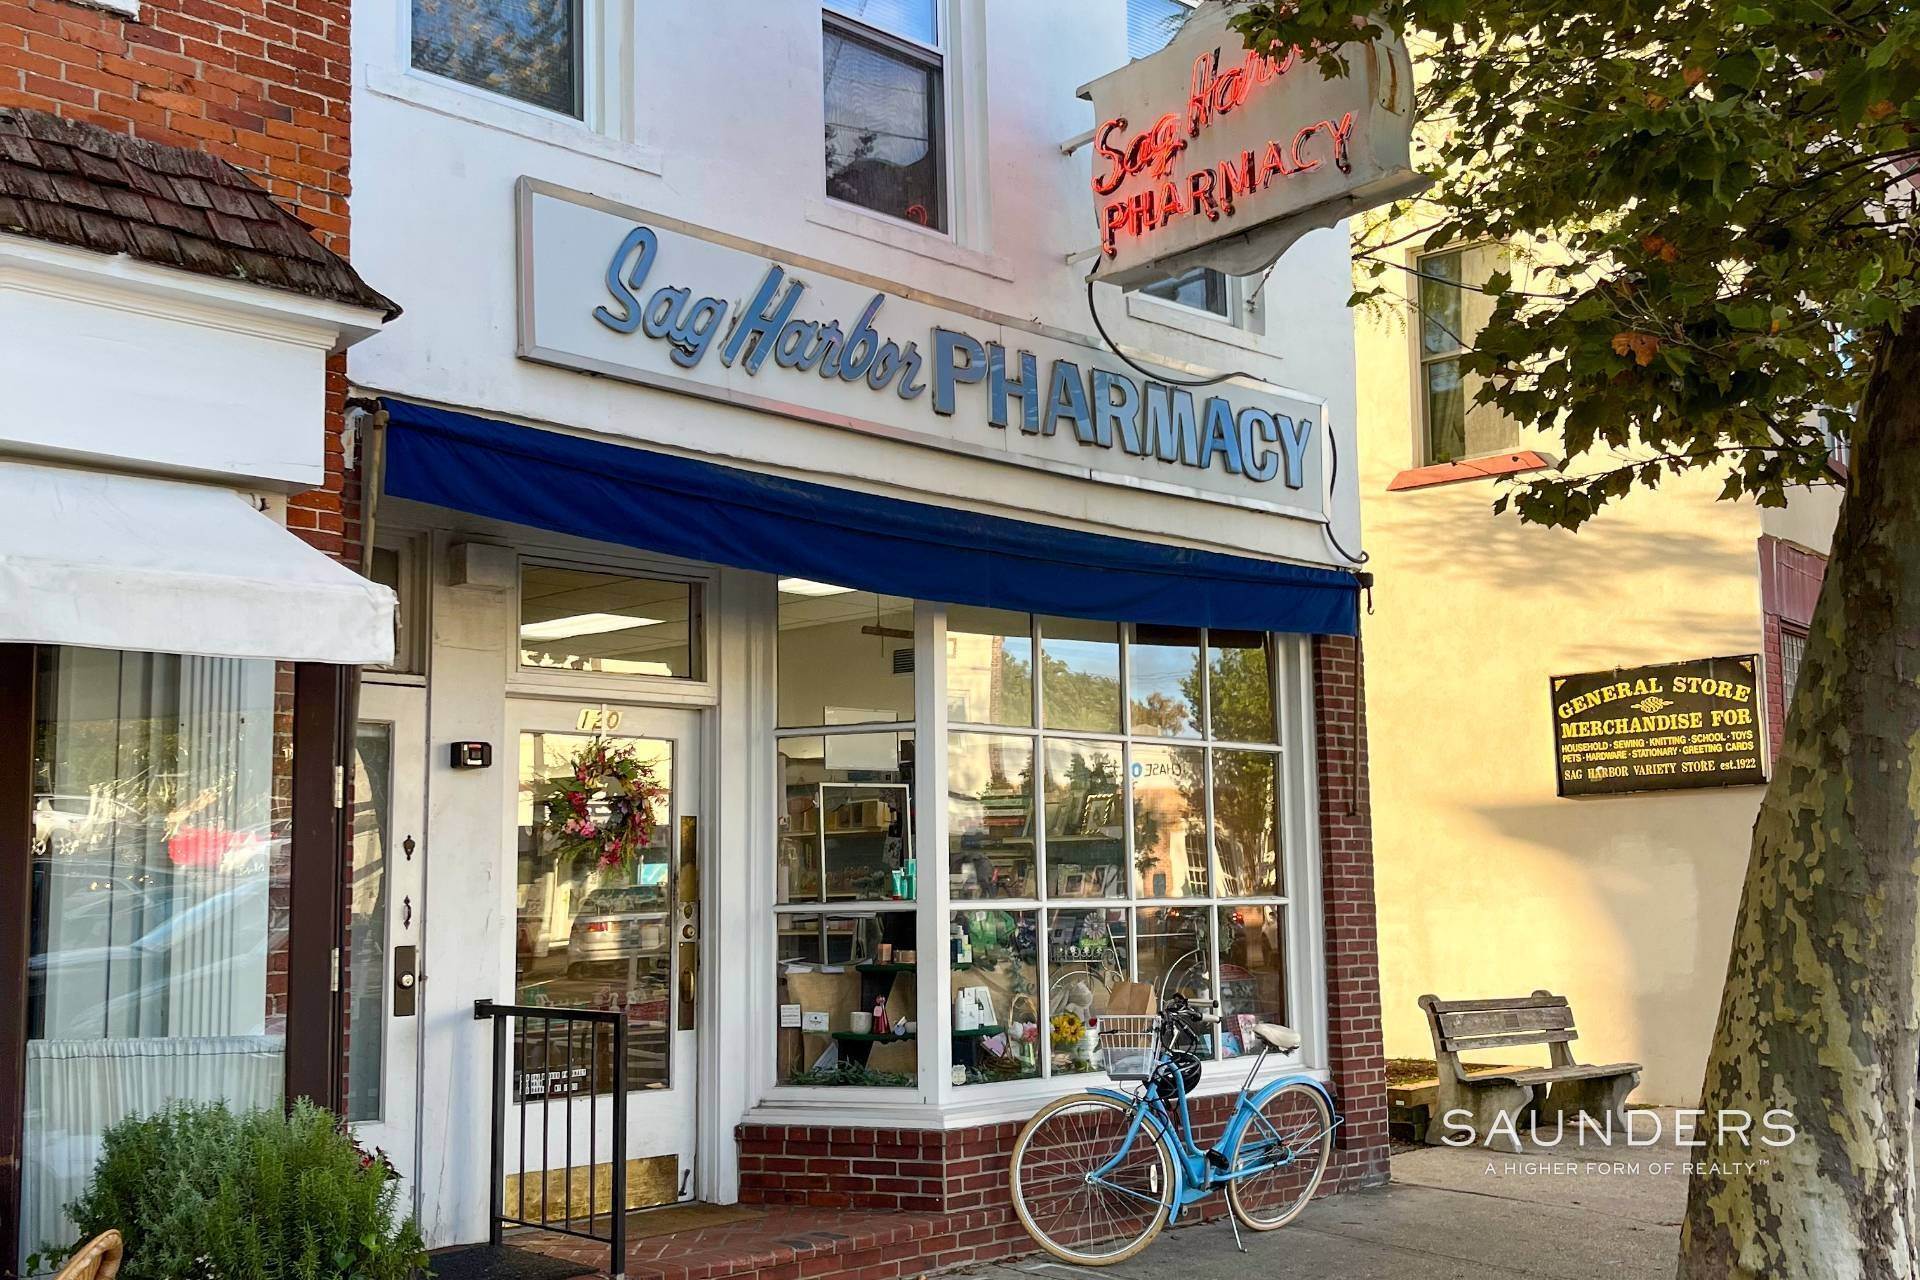 Commercial for Sale at Sag Harbor Main Street Commercial Investment Property 120 Main Street, Sag Harbor, NY 11963